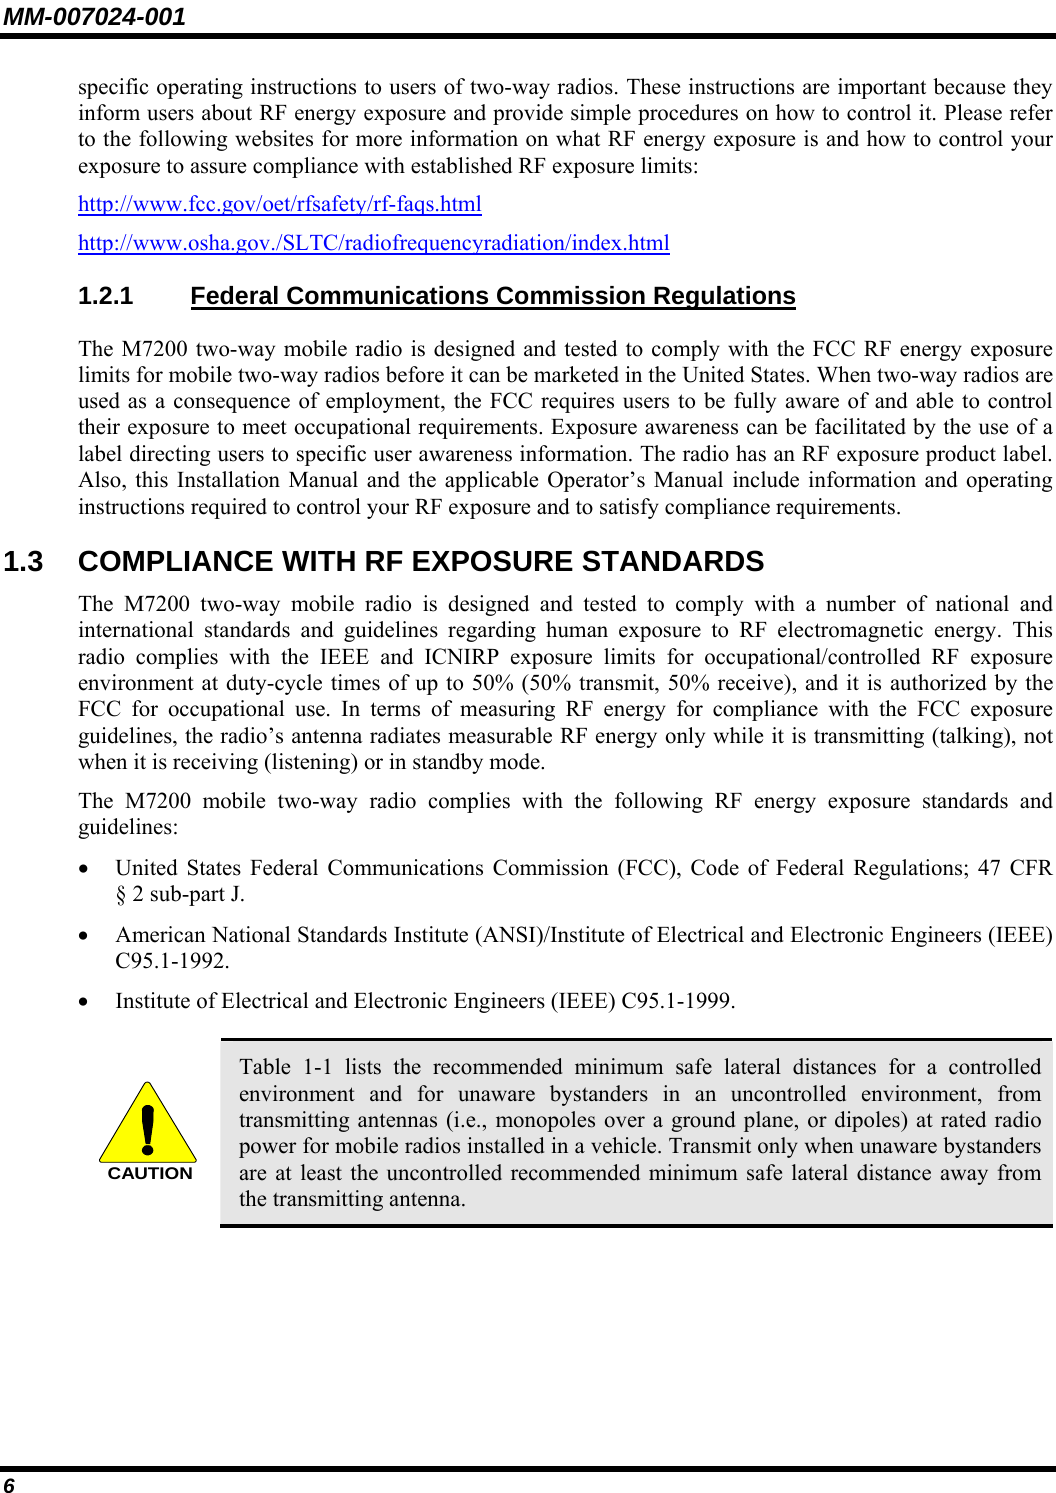 MM-007024-001 6 specific operating instructions to users of two-way radios. These instructions are important because they inform users about RF energy exposure and provide simple procedures on how to control it. Please refer to the following websites for more information on what RF energy exposure is and how to control your exposure to assure compliance with established RF exposure limits: http://www.fcc.gov/oet/rfsafety/rf-faqs.html http://www.osha.gov./SLTC/radiofrequencyradiation/index.html 1.2.1 Federal Communications Commission Regulations The M7200 two-way mobile radio is designed and tested to comply with the FCC RF energy exposure limits for mobile two-way radios before it can be marketed in the United States. When two-way radios are used as a consequence of employment, the FCC requires users to be fully aware of and able to control their exposure to meet occupational requirements. Exposure awareness can be facilitated by the use of a label directing users to specific user awareness information. The radio has an RF exposure product label. Also, this Installation Manual and the applicable Operator’s Manual include information and operating instructions required to control your RF exposure and to satisfy compliance requirements. 1.3  COMPLIANCE WITH RF EXPOSURE STANDARDS The M7200 two-way mobile radio is designed and tested to comply with a number of national and international standards and guidelines regarding human exposure to RF electromagnetic energy. This radio complies with the IEEE and ICNIRP exposure limits for occupational/controlled RF exposure environment at duty-cycle times of up to 50% (50% transmit, 50% receive), and it is authorized by the FCC for occupational use. In terms of measuring RF energy for compliance with the FCC exposure guidelines, the radio’s antenna radiates measurable RF energy only while it is transmitting (talking), not when it is receiving (listening) or in standby mode. The M7200 mobile two-way radio complies with the following RF energy exposure standards and guidelines: • United States Federal Communications Commission (FCC), Code of Federal Regulations; 47 CFR § 2 sub-part J. • American National Standards Institute (ANSI)/Institute of Electrical and Electronic Engineers (IEEE) C95.1-1992. • Institute of Electrical and Electronic Engineers (IEEE) C95.1-1999.  CAUTION Table 1-1 lists the recommended minimum safe lateral distances for a controlled environment and for unaware bystanders in an uncontrolled environment, from transmitting antennas (i.e., monopoles over a ground plane, or dipoles) at rated radio power for mobile radios installed in a vehicle. Transmit only when unaware bystanders are at least the uncontrolled recommended minimum safe lateral distance away from the transmitting antenna.  